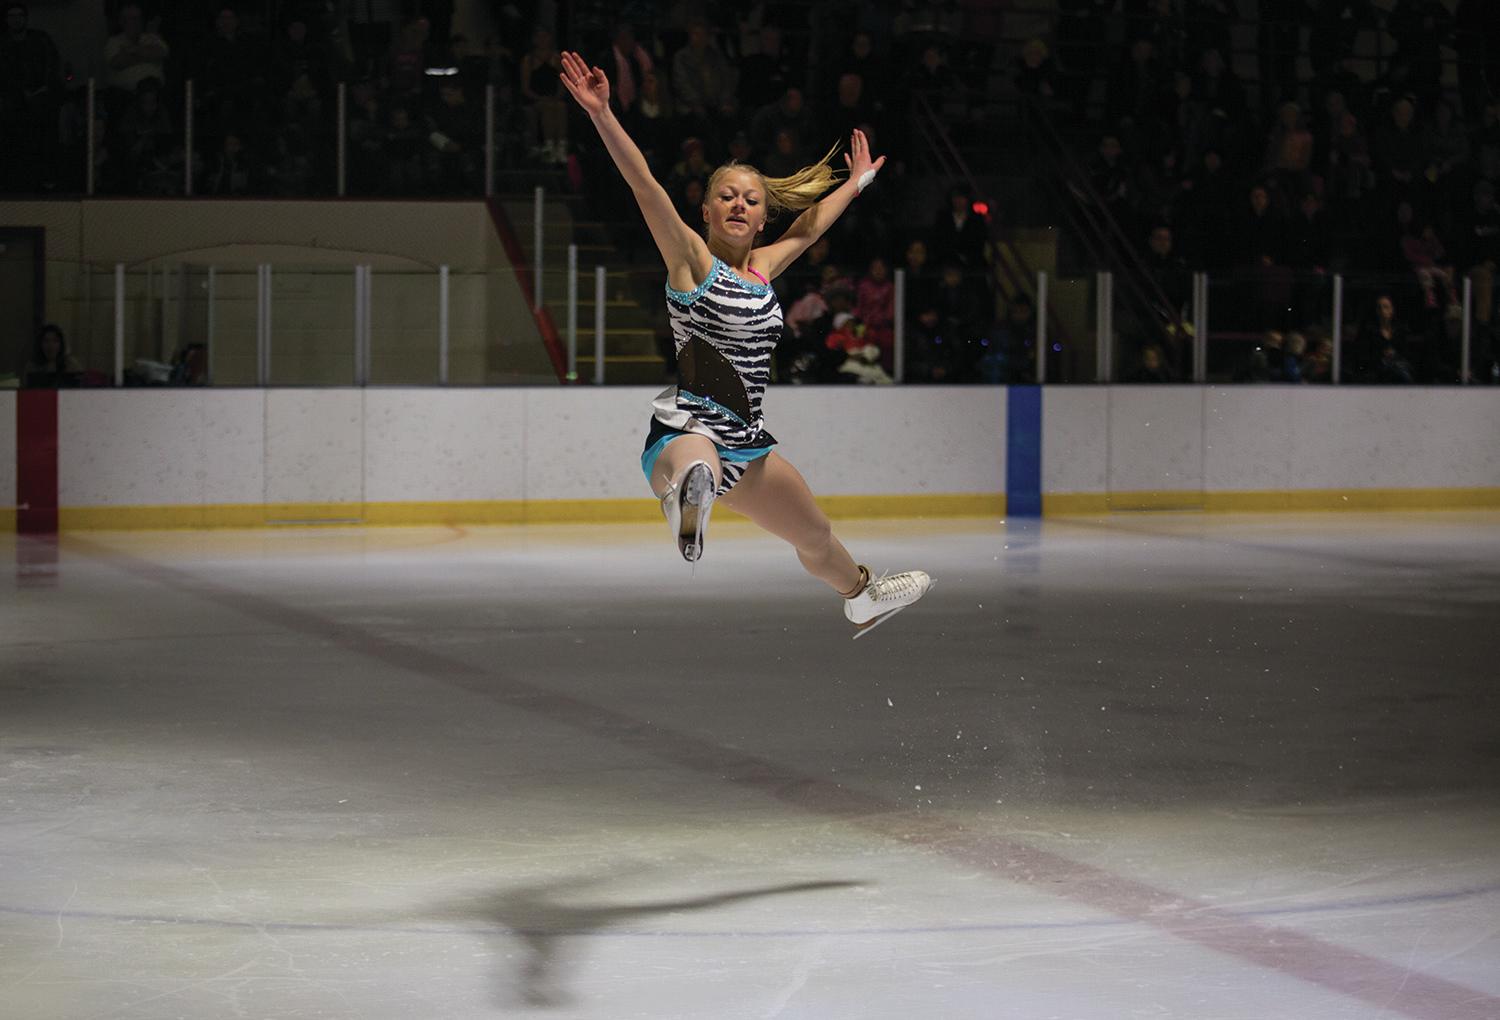 FOCUS - Amy Severtson completed a jump for one of her routines during the Red Deer Skating Club’s 2015 ‘A Night at the Movies’ show at the Kinsmen Arena in Red Deer last month.